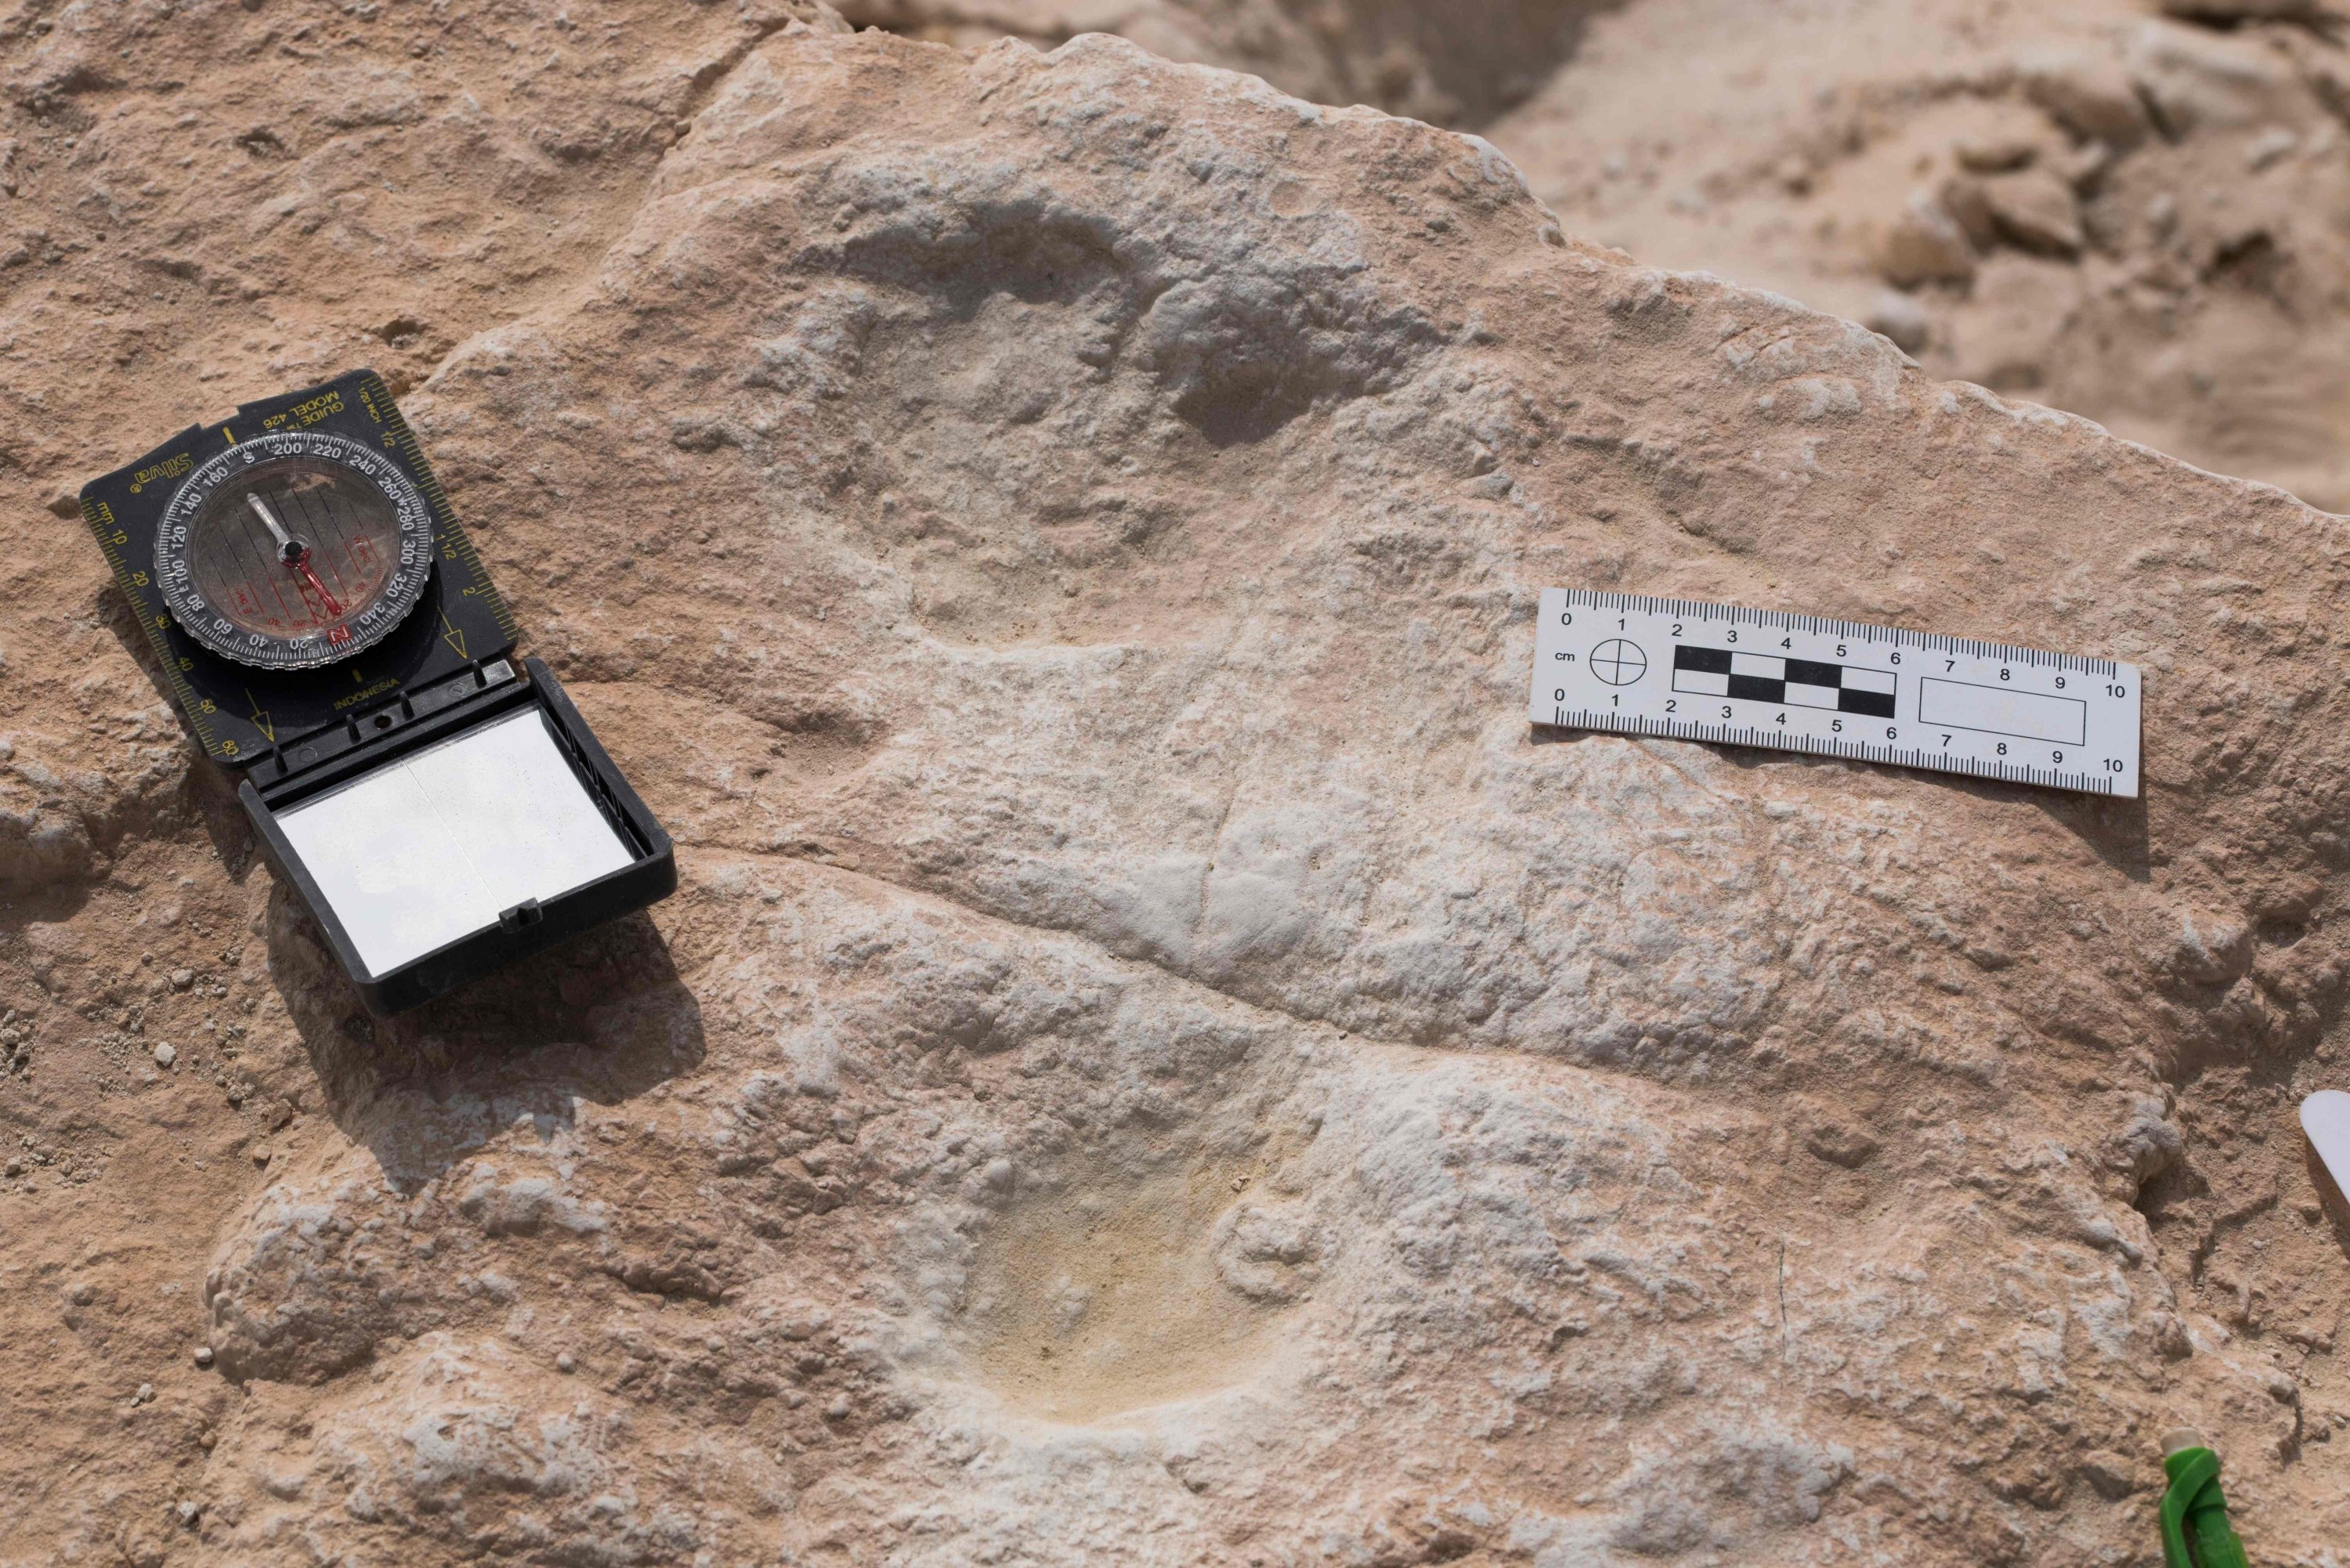 This undated handout photo obtained September 16, 2020 shows the first human footprint discovered at the Alathar ancient lake. (AFP Photo)